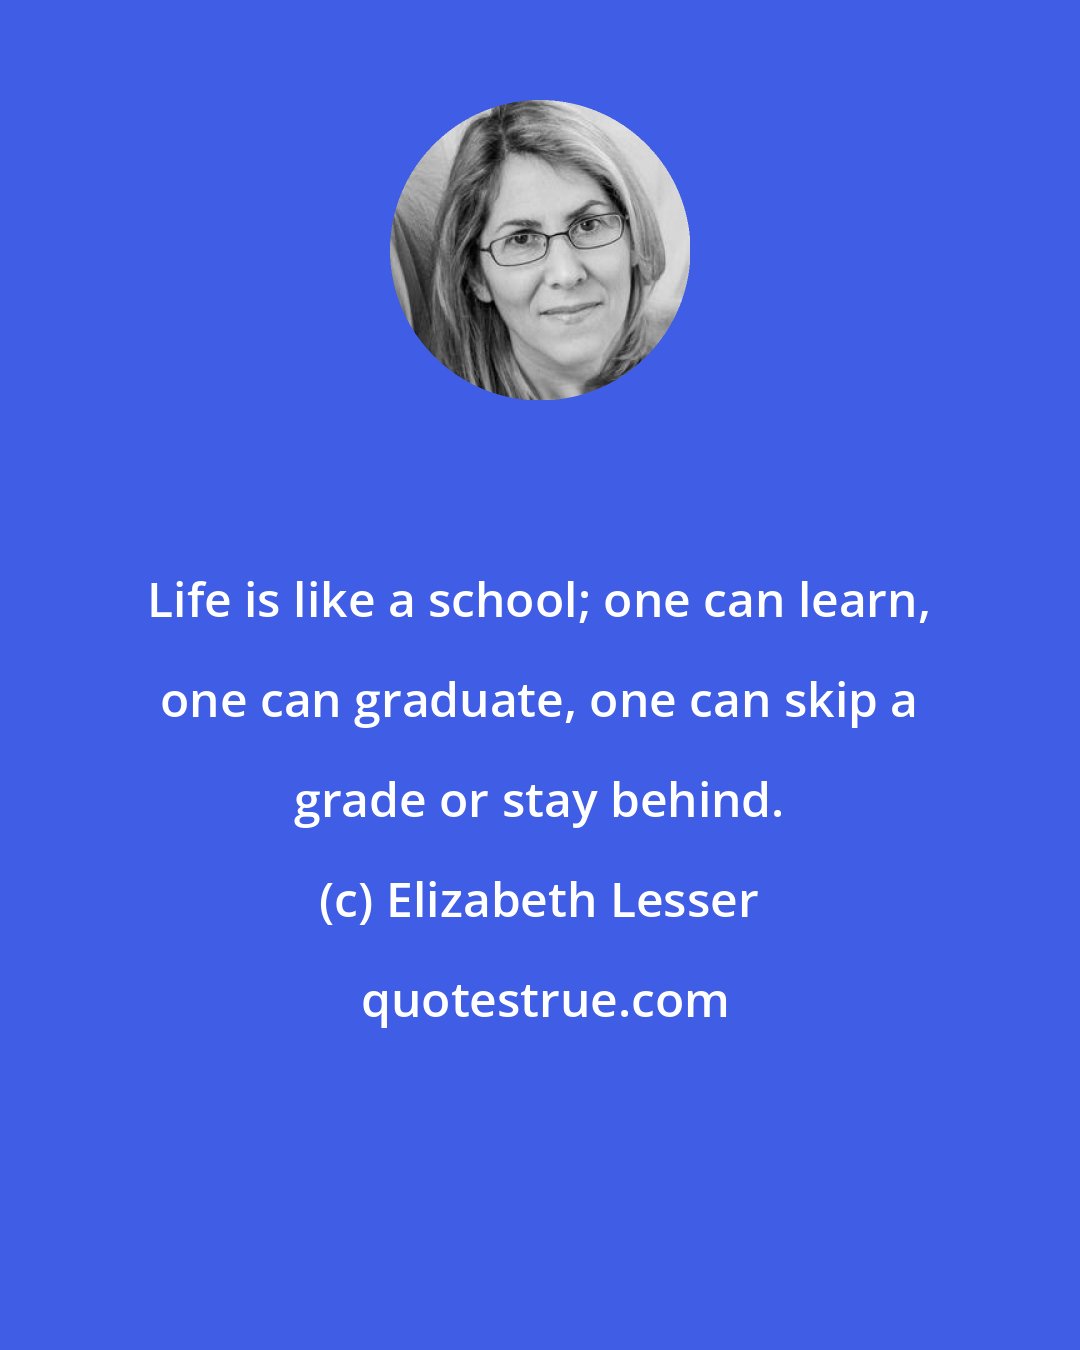 Elizabeth Lesser: Life is like a school; one can learn, one can graduate, one can skip a grade or stay behind.